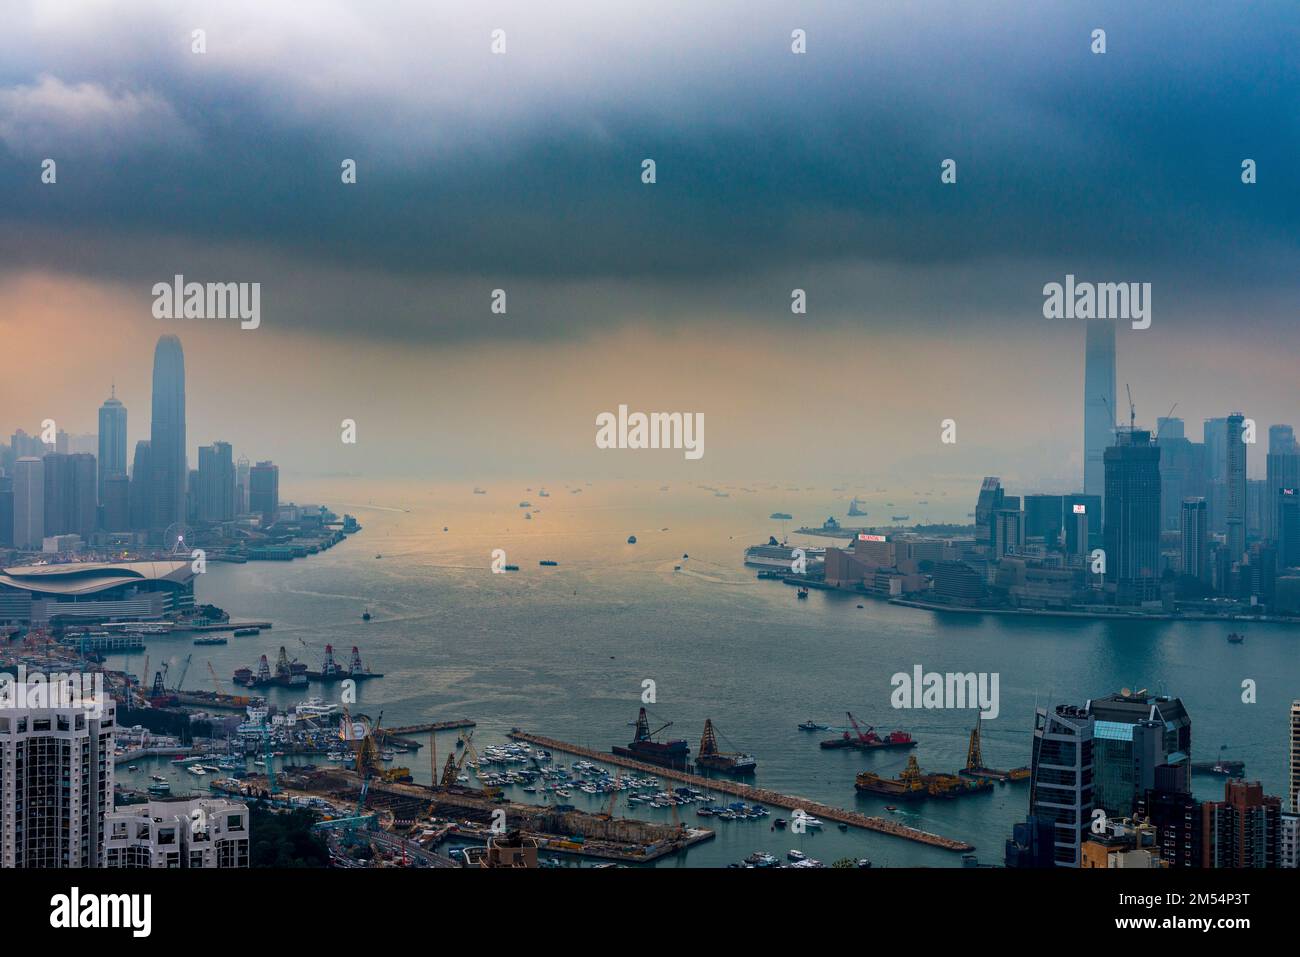 An approaching storm combines with smog to shroud the Hong Kong skyline, 2016 Stock Photo